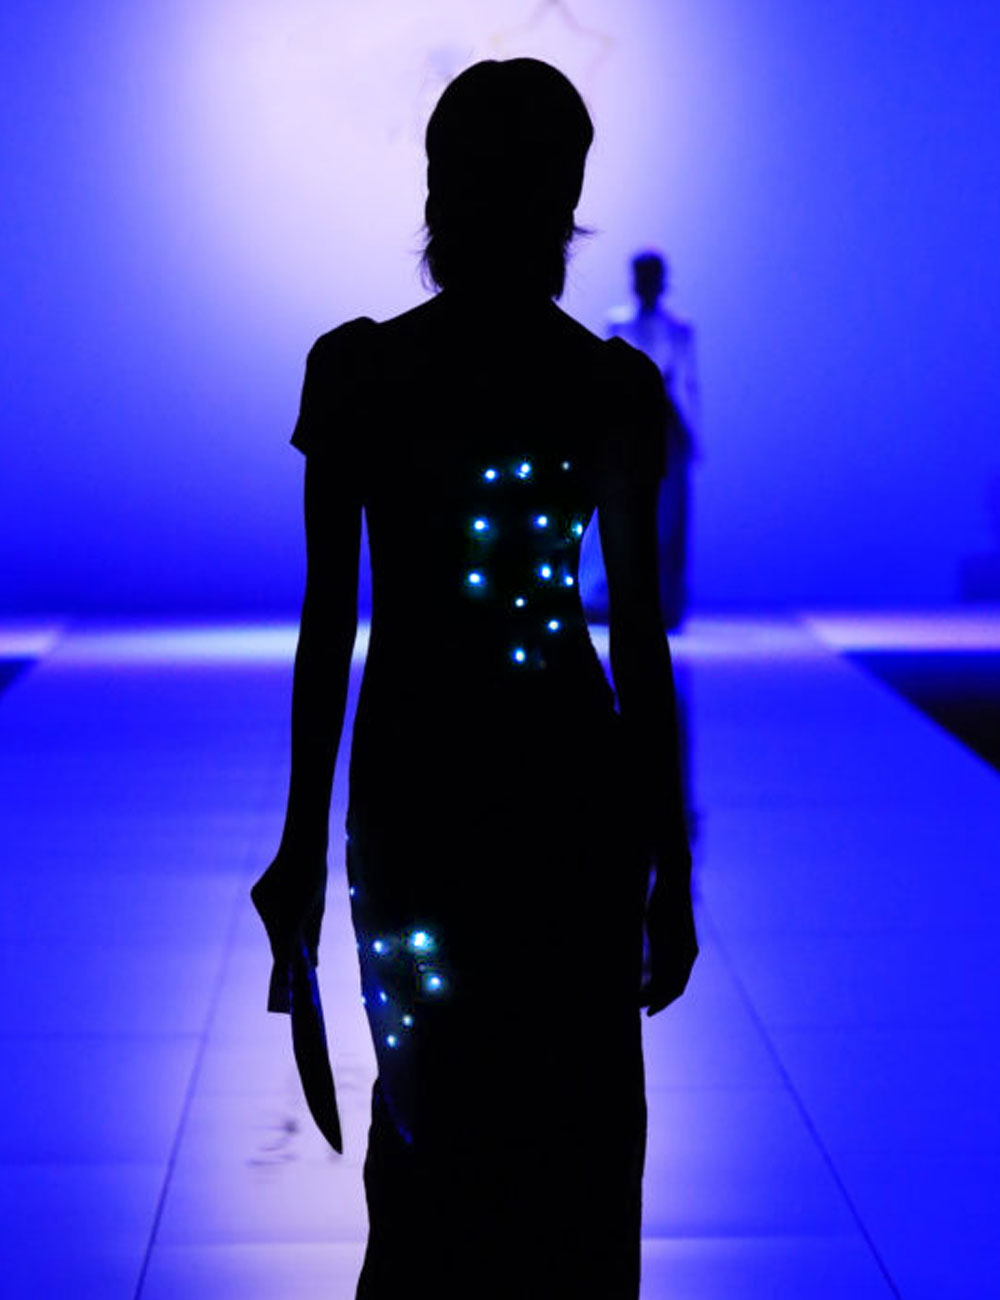 Way To Light Up A Room: The Dress That Glows, Plus More Futuristic Fashions